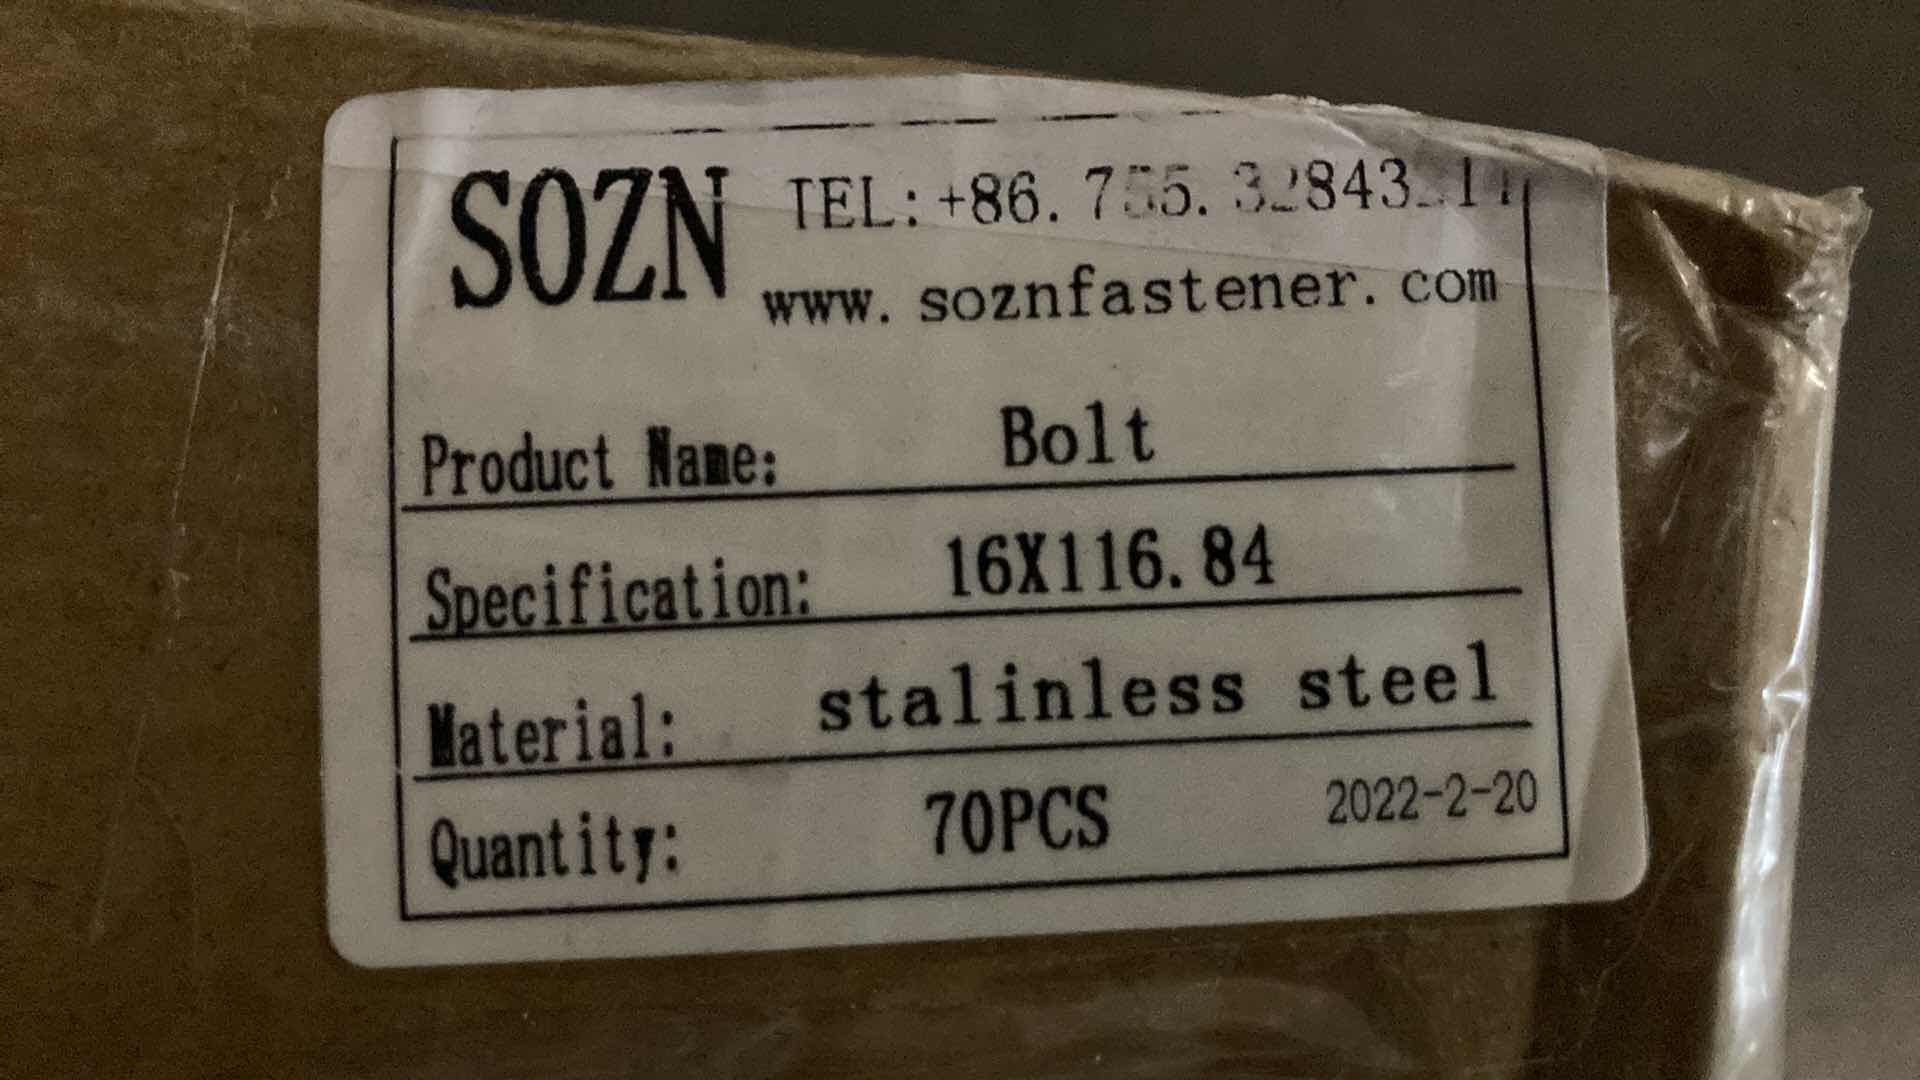 Photo 5 of NEW SOZN FASTENER STAINLESS STEEL BOLT (70PCS) 16mm X 116.84mm